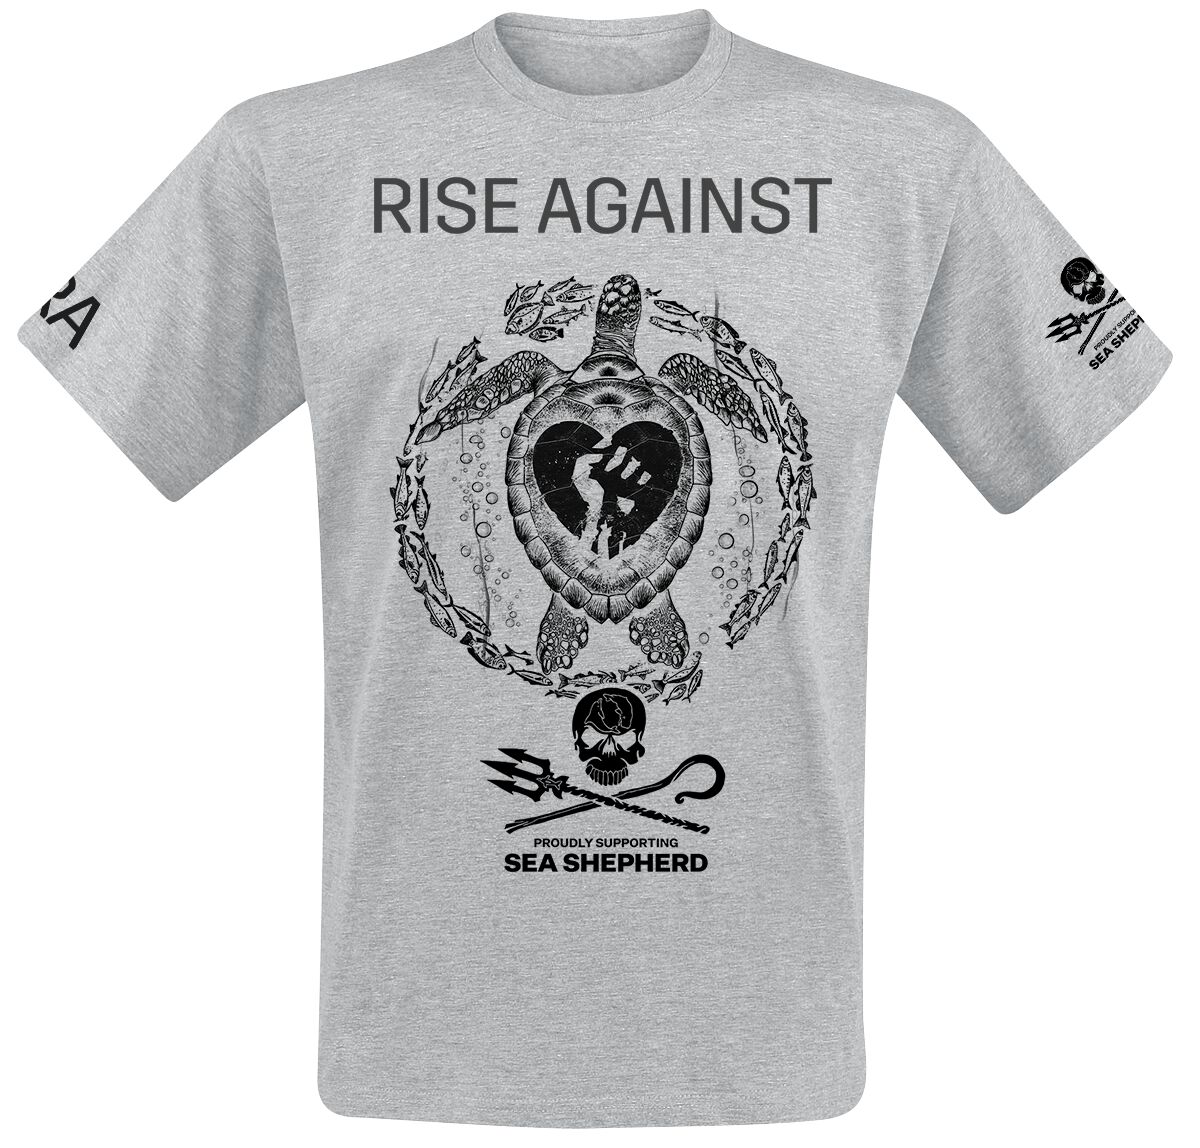 Rise Against Sea Shepherd Cooperation - Our Precious Time Is Running Out T-Shirt grau meliert in M